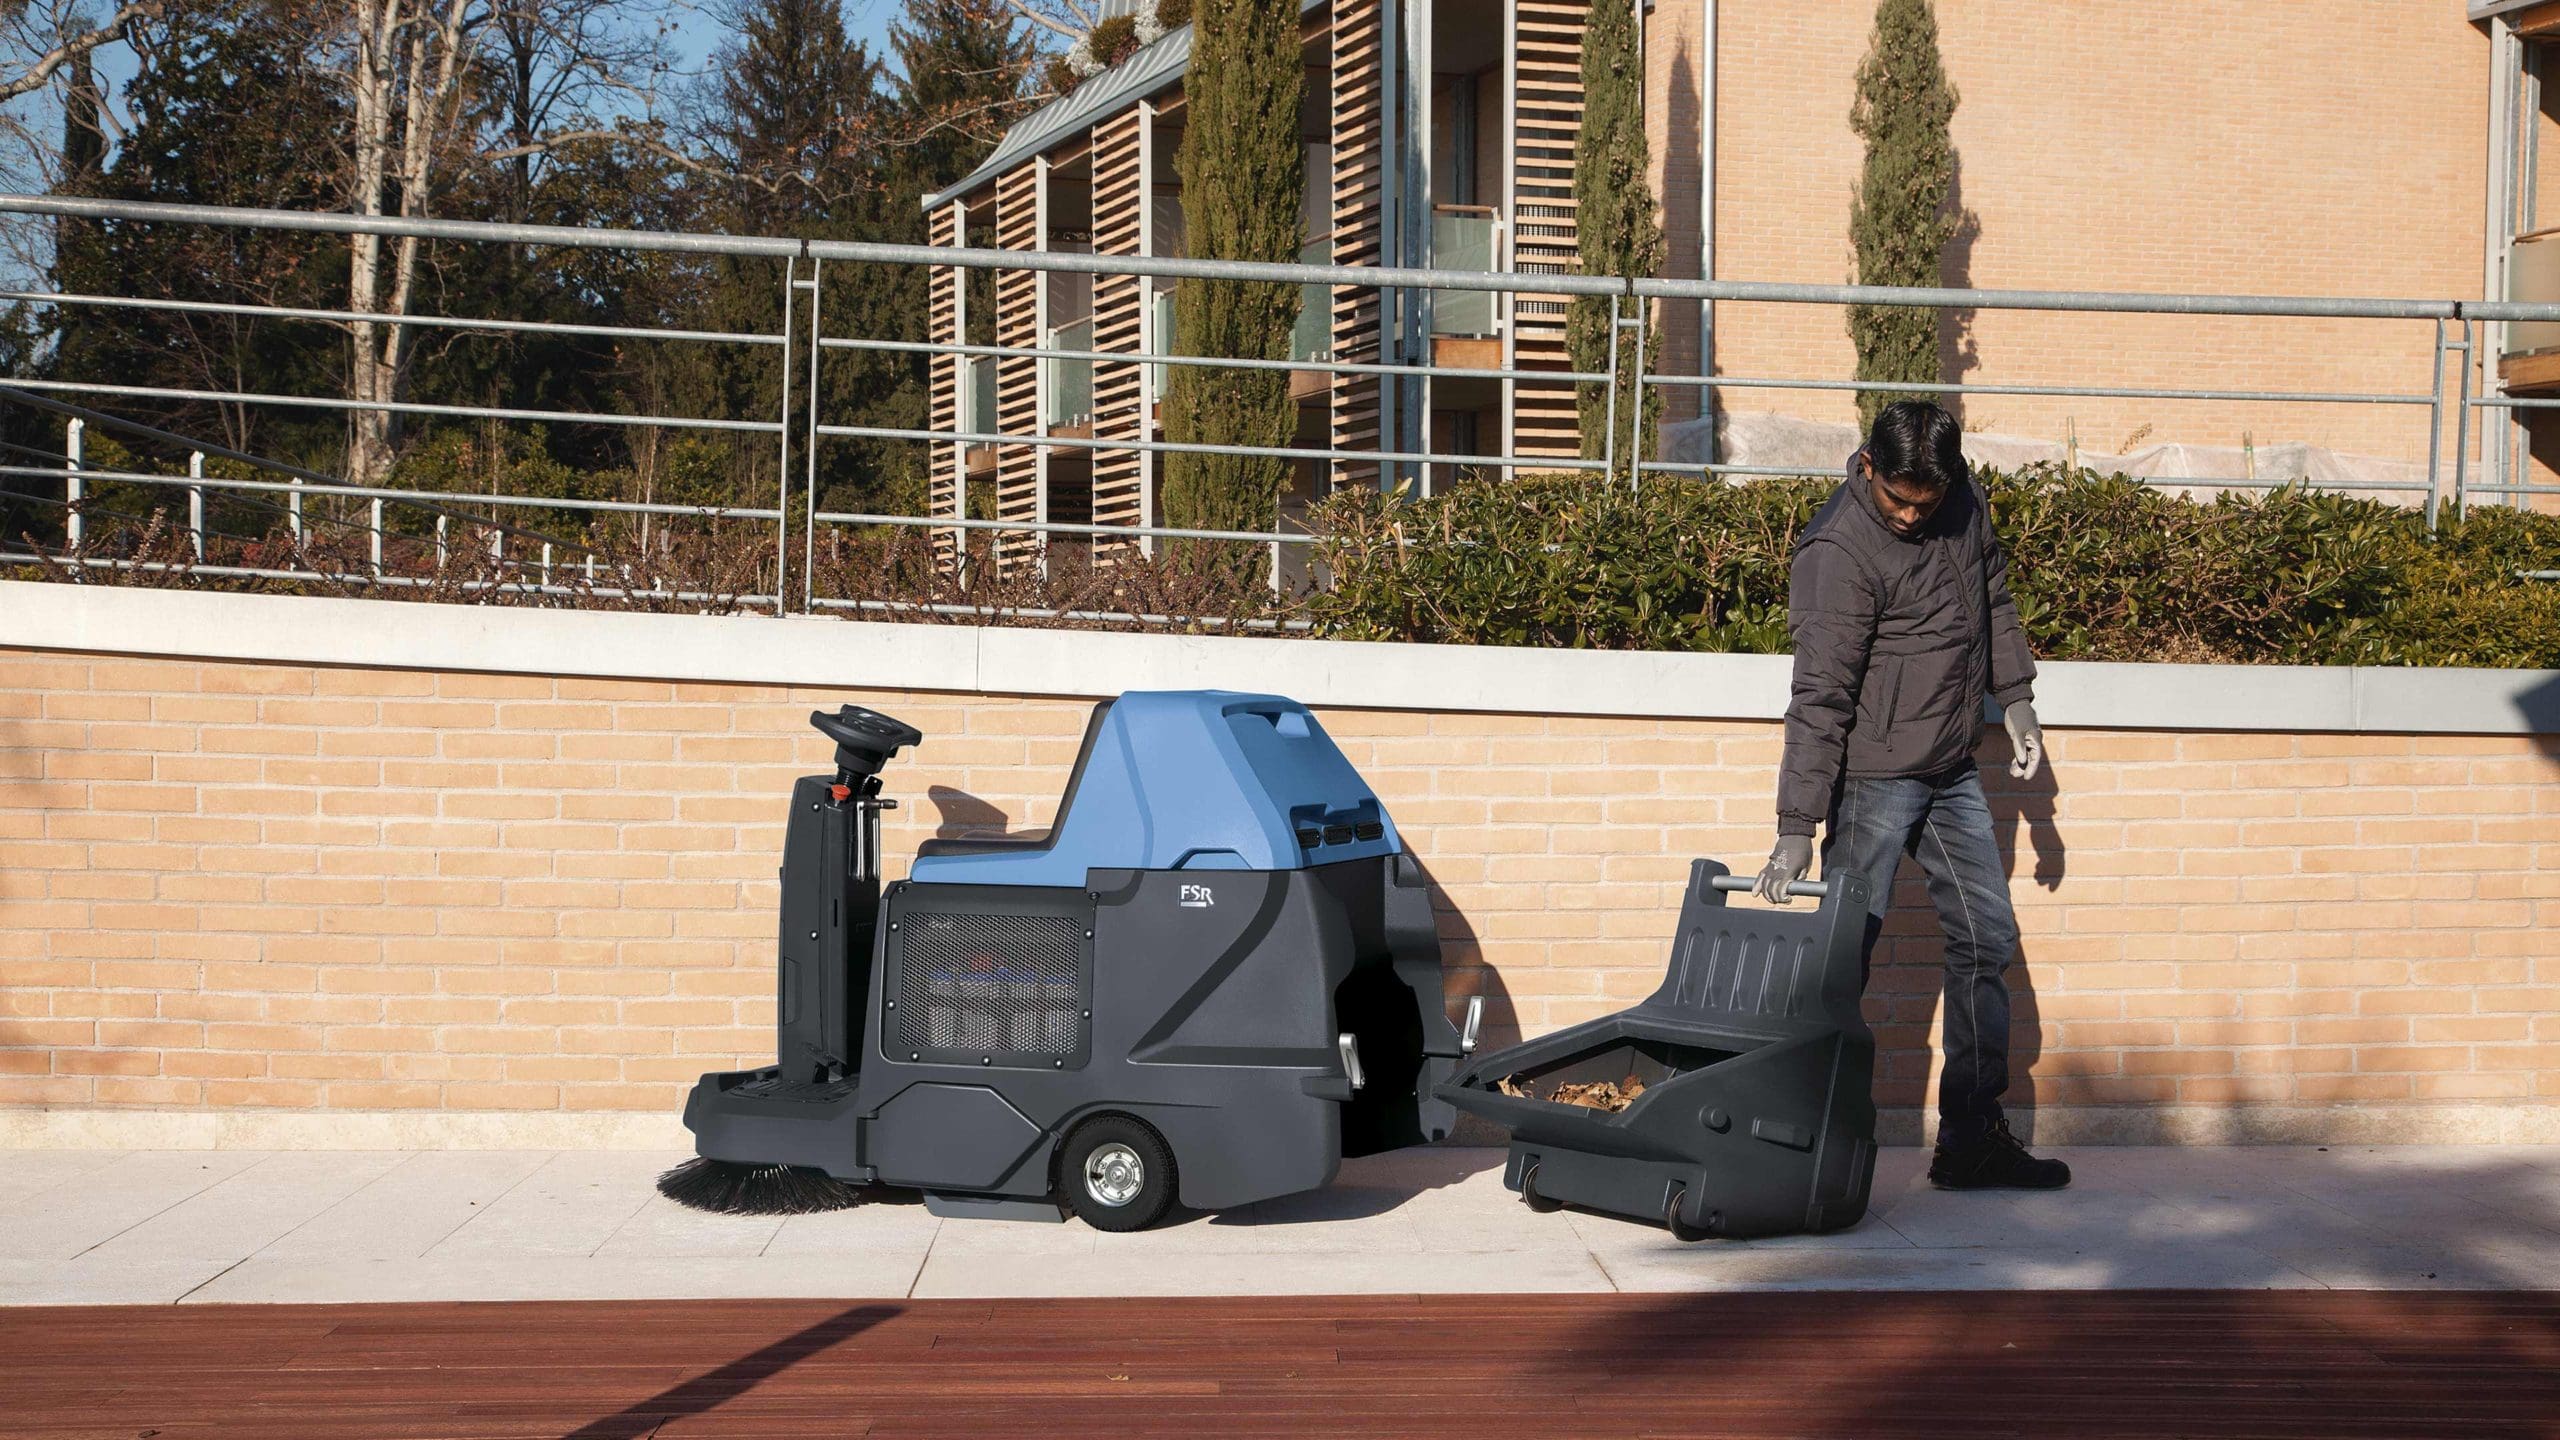 How Sweeper Machines Work - Understand How Sweepers Work